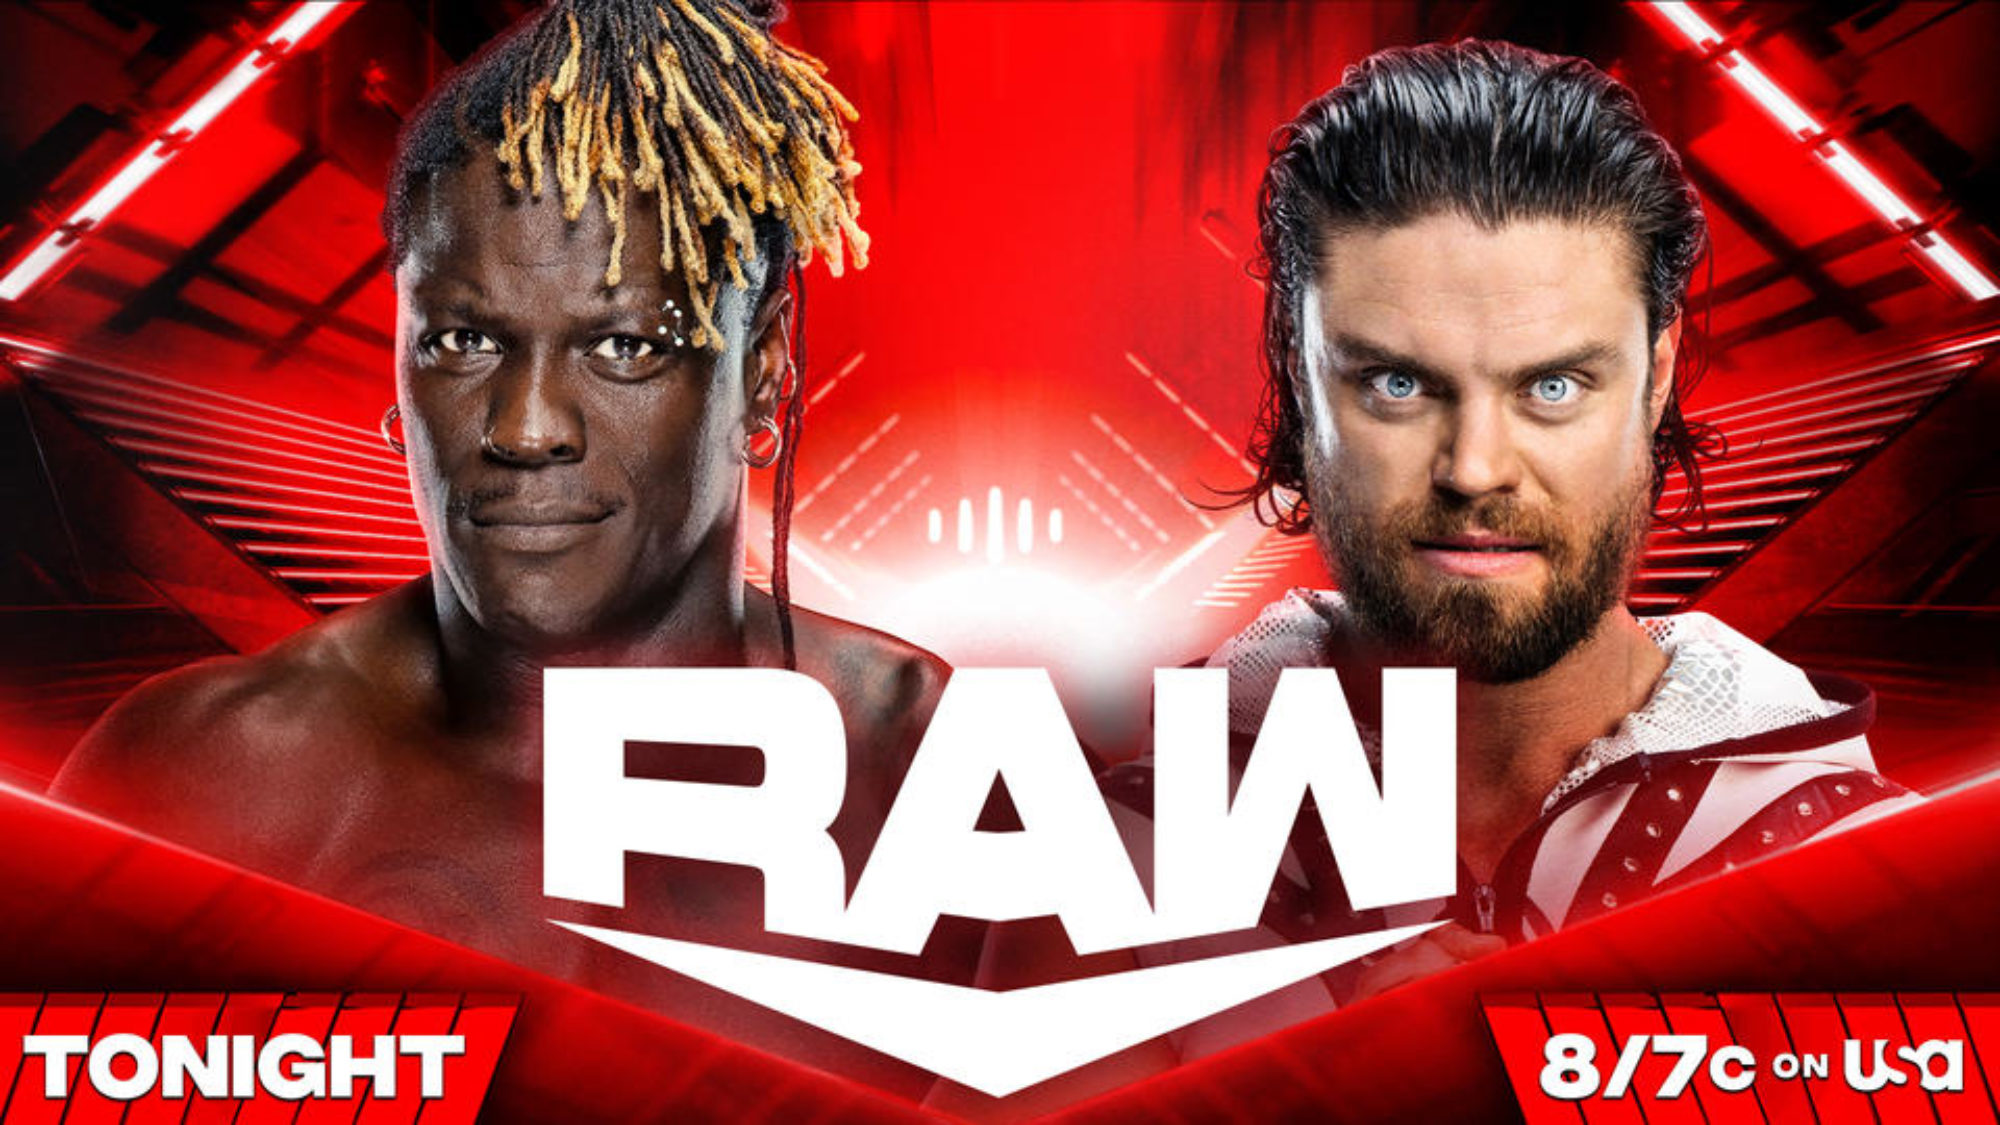 WWE Raw Christmas Comes Early for True Wrestling Fans Tonight